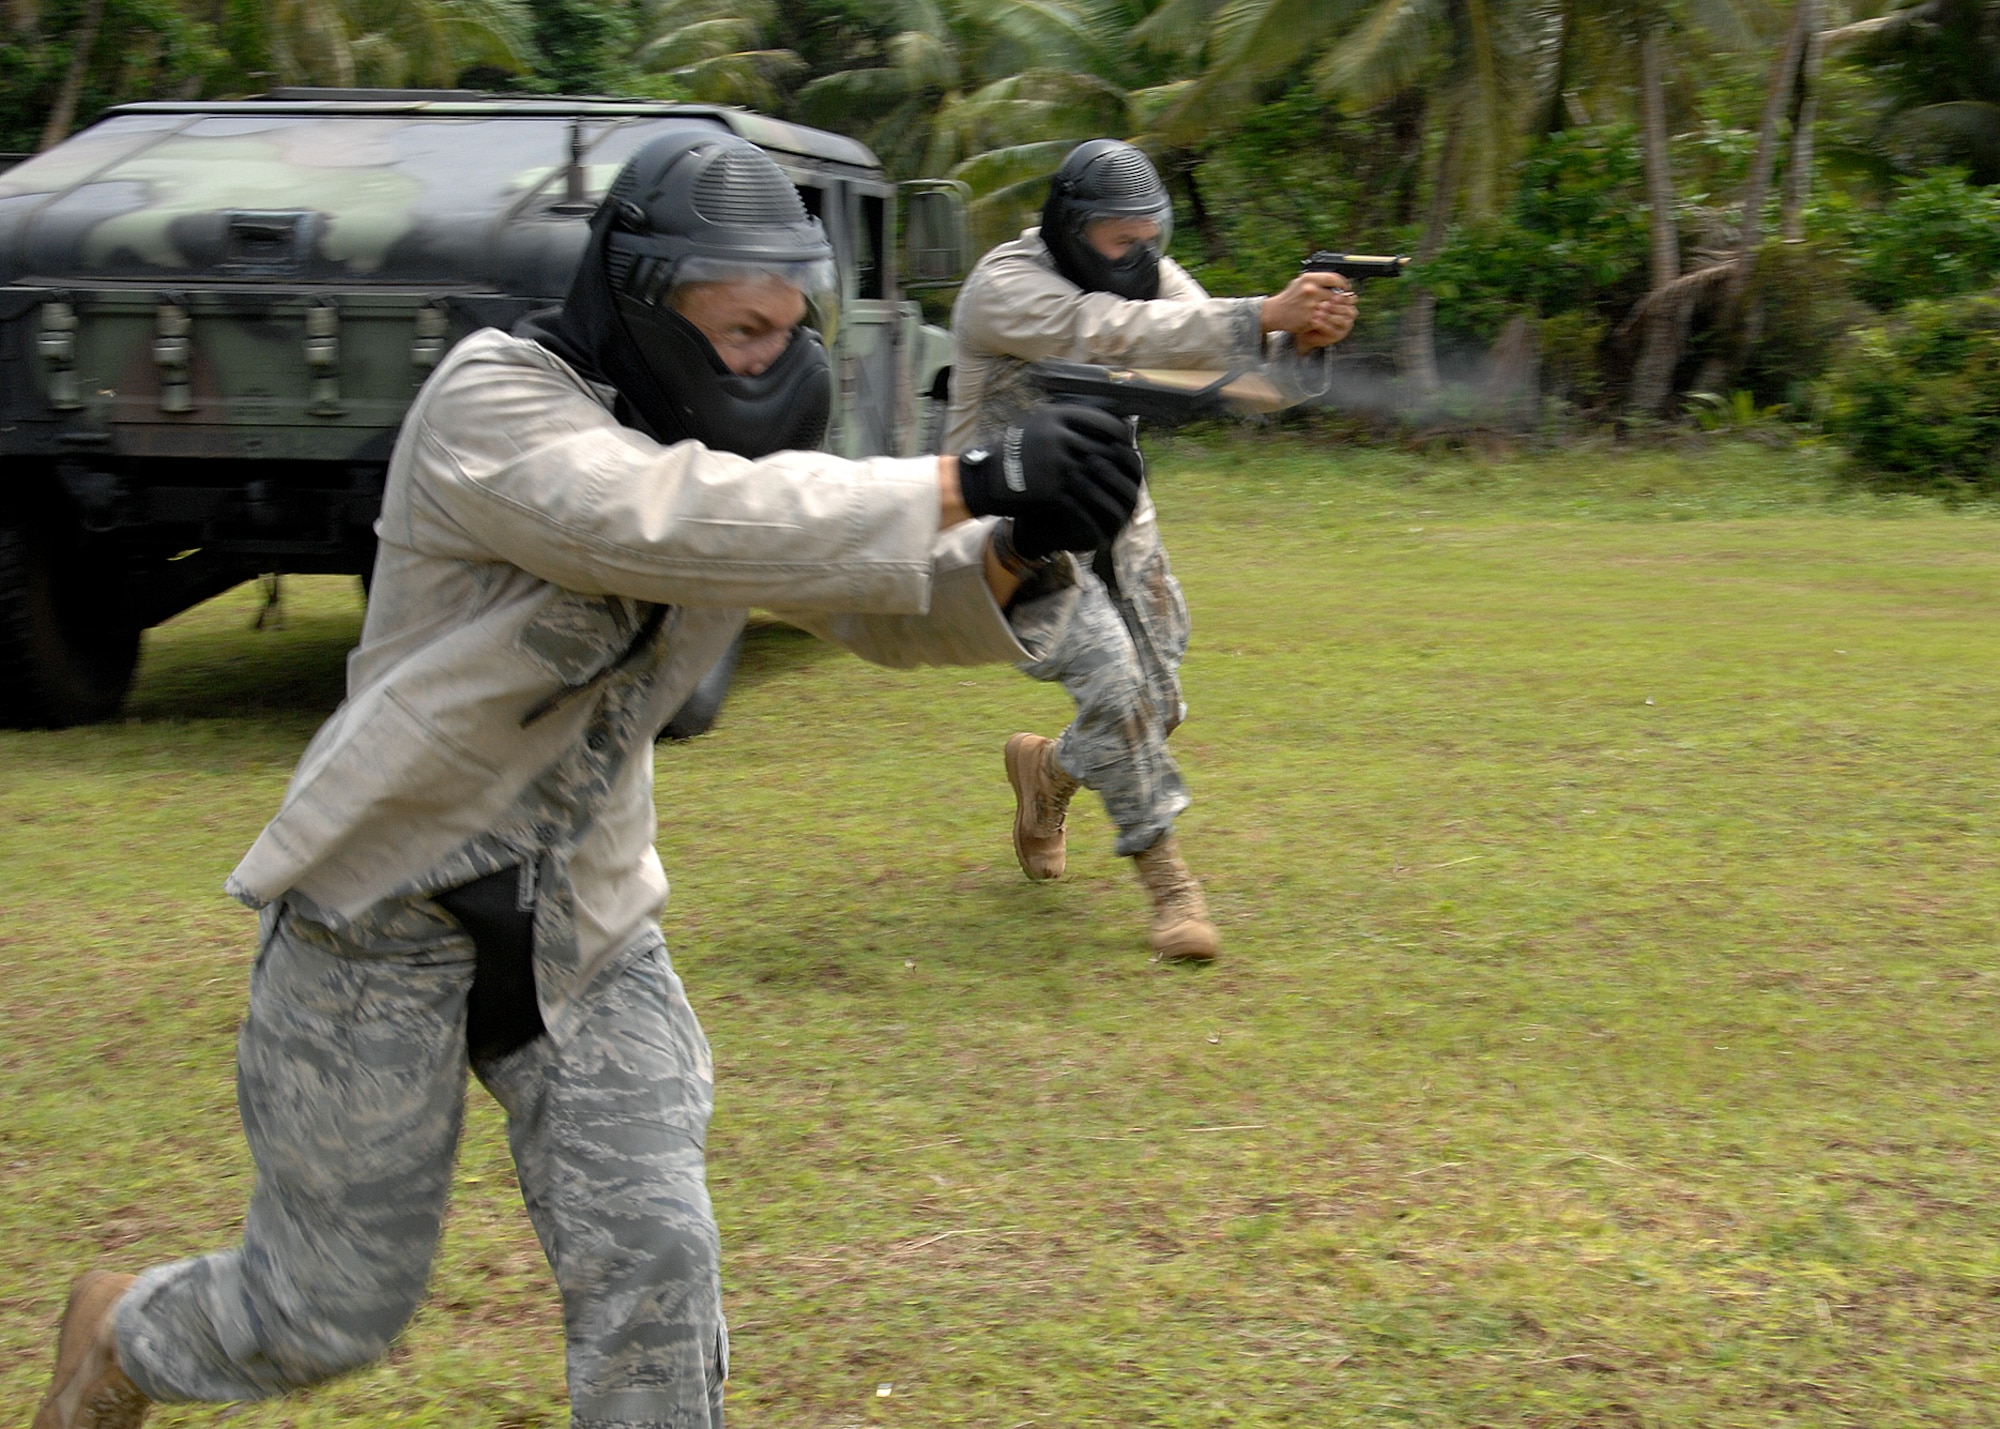 Staff Sgt. Daniel Gonzalez from Kadena Air Base, Japan and Staff Sgt. Robert Bishop from Misawa Air Base, Japan participate in  a live fire scenario during the Commando Warrior Simuntions training exercise July 30 at Andersen Air Force Base, Guam. 
M-9 and M-4 Simunition configured training weapons and colored FX rounds were used during the training course. Security Forces airmen from across  the Pacific Air Forces came together to perform the training hosted by the 736th SFS. (U.S. Air Force photo by Airman 1st Class Nichelle Griffiths)
